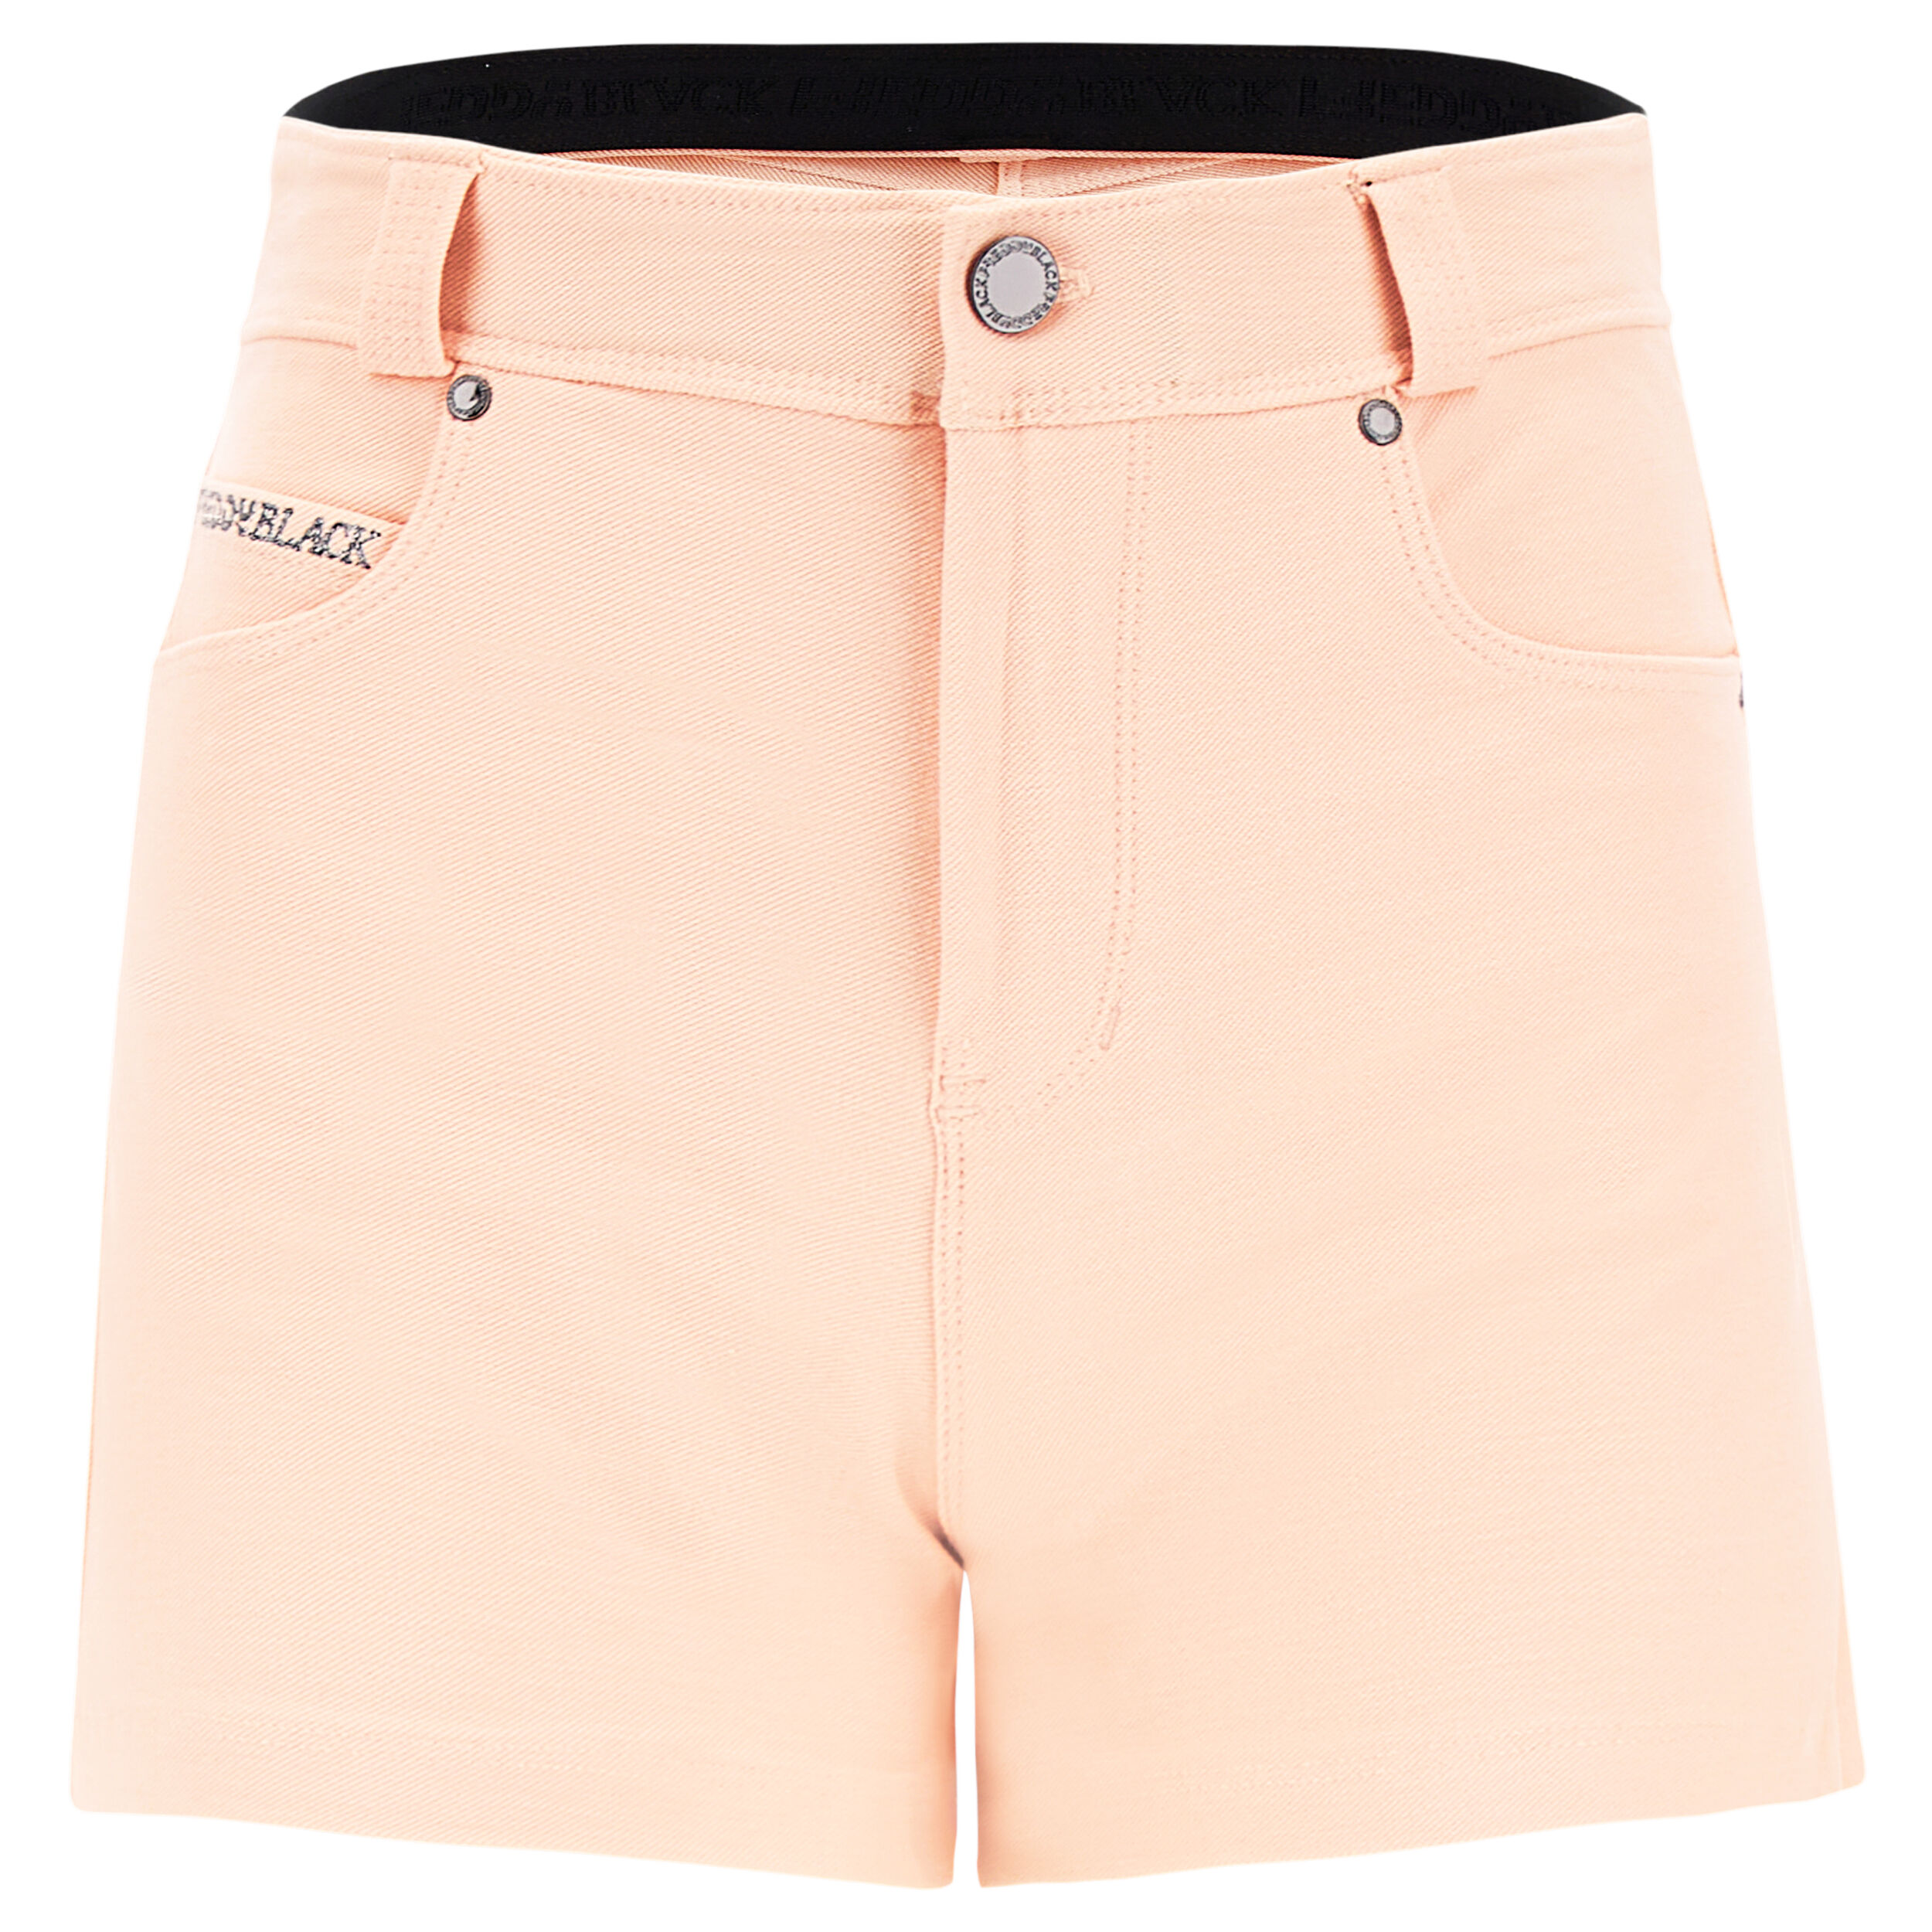 Freddy Shorts vita regular in jersey drill colorato Peachy Keen Donna Large